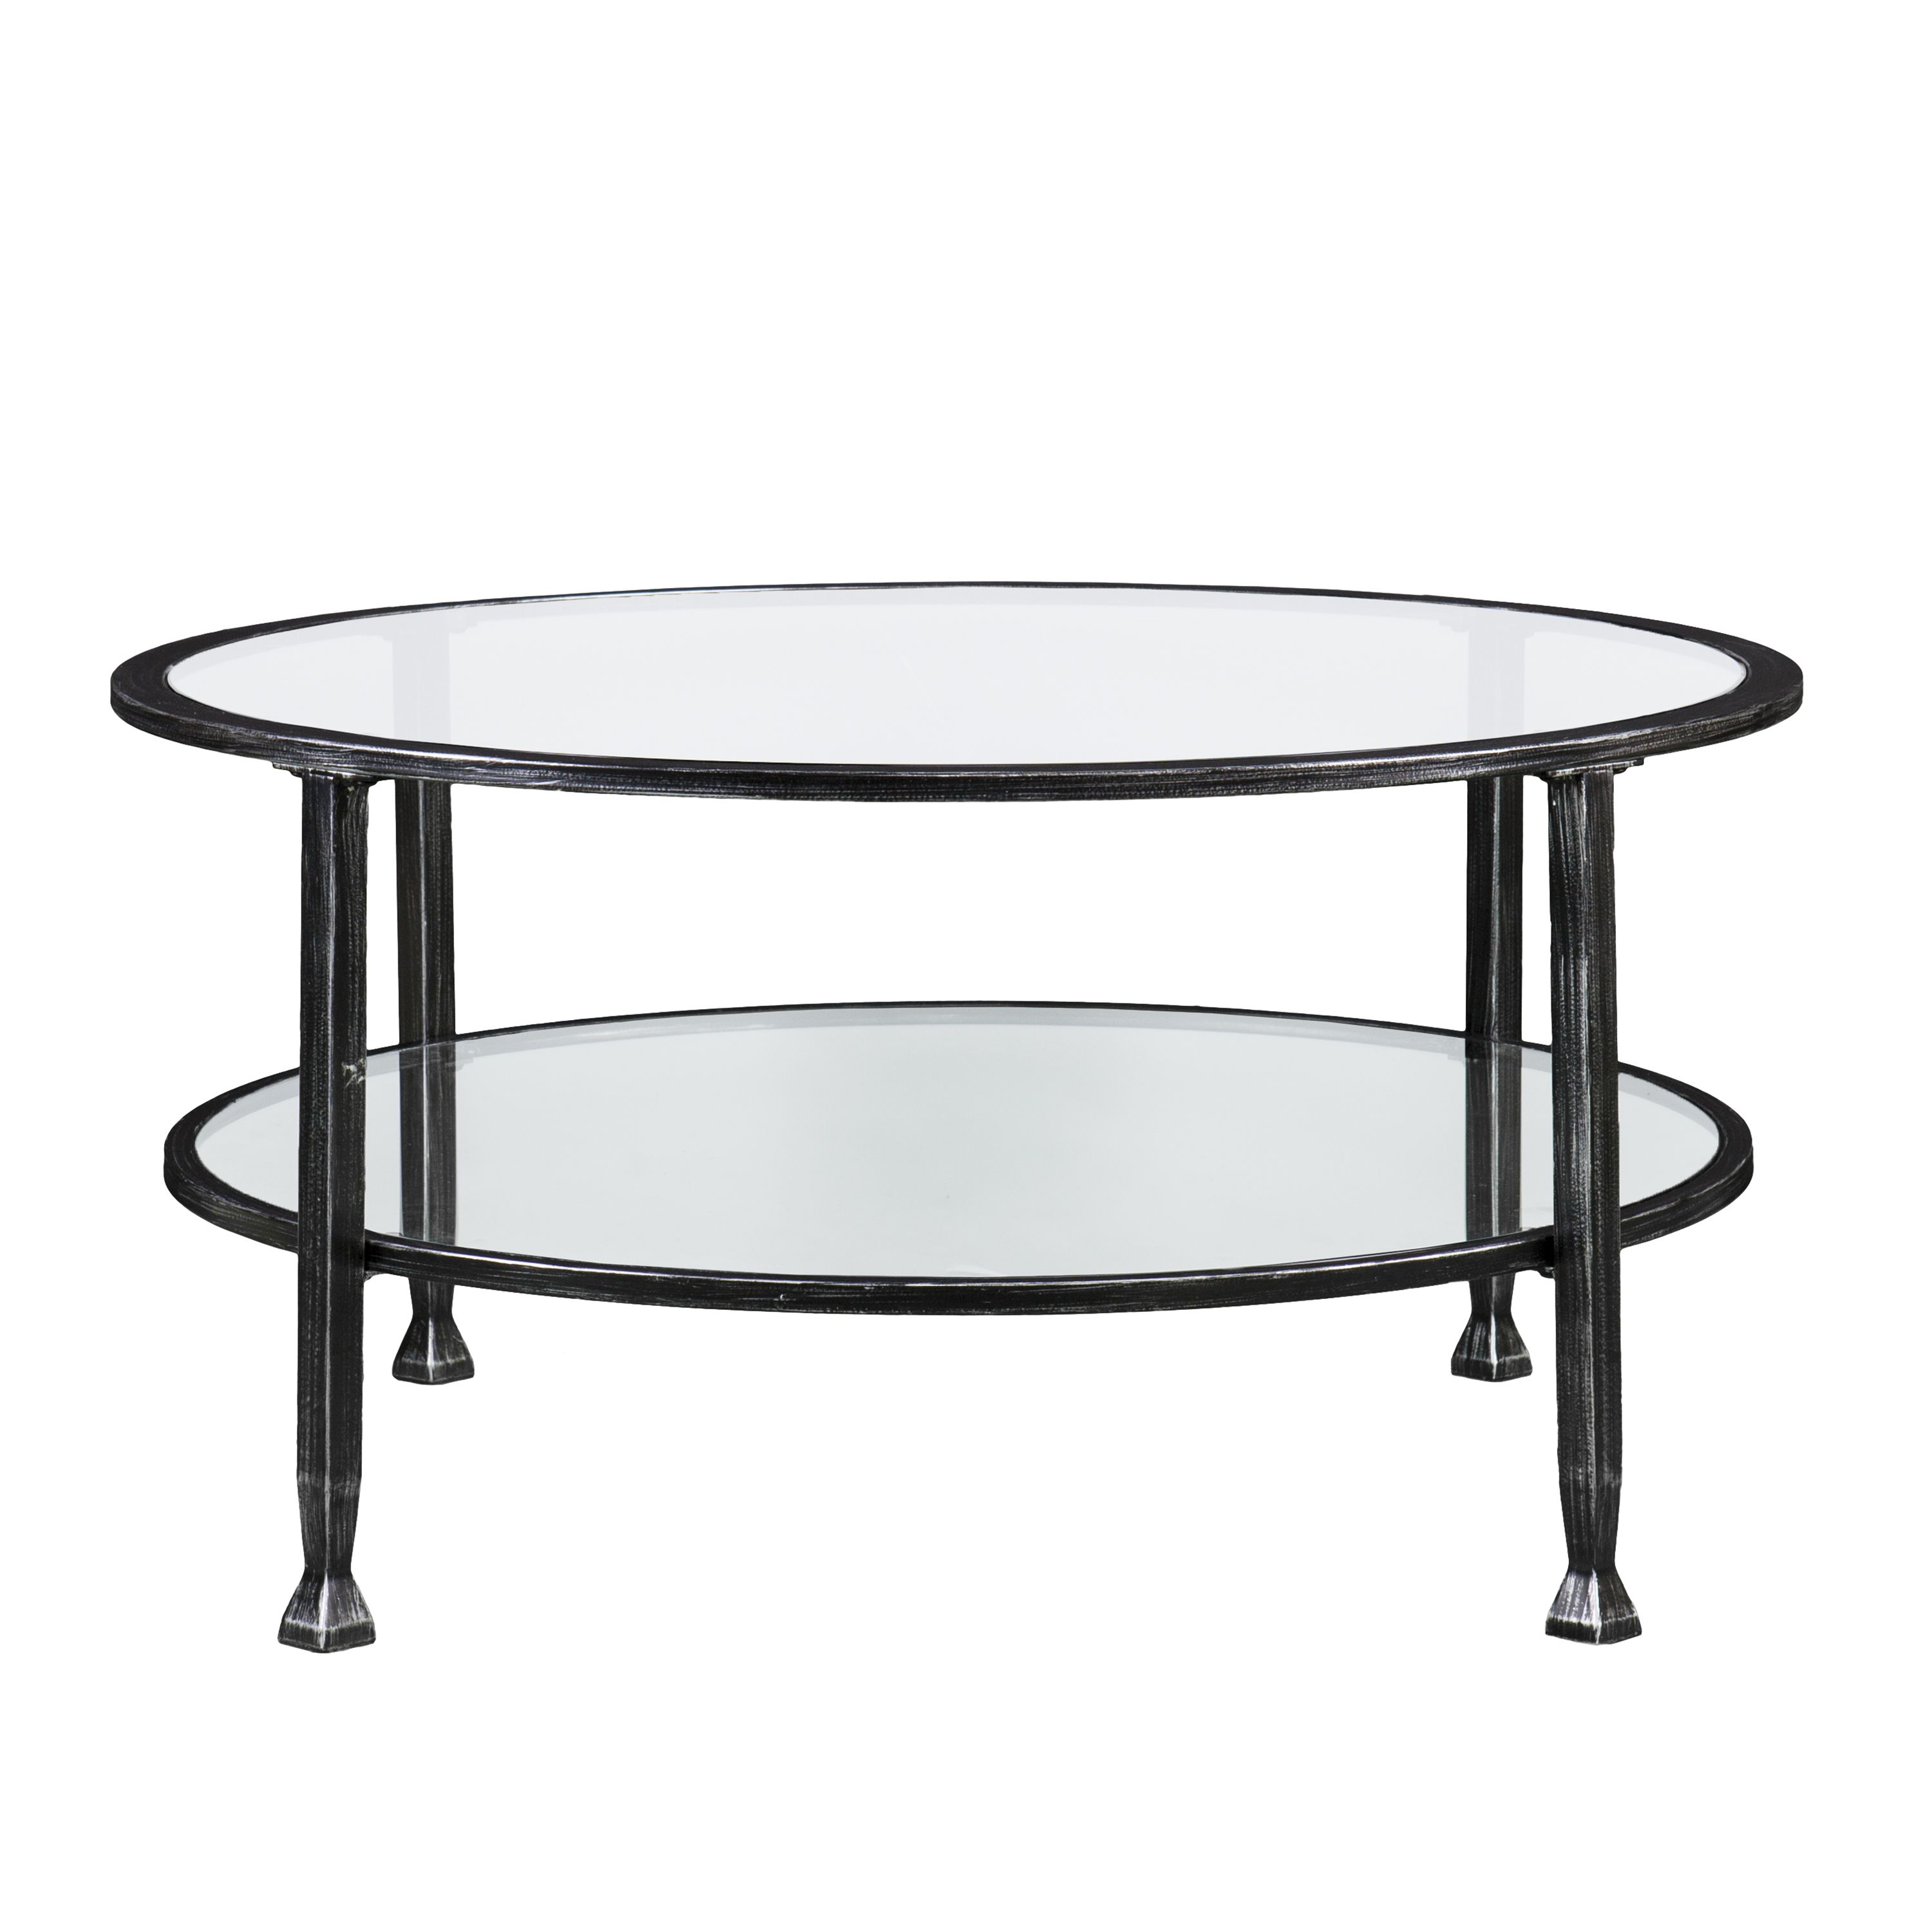 NEW Round Coffee Table Metal Glass Vintage Modern Style Home Top Cocktail Shelf Basket Storage Elegant Small Durable Indoor Furniture *↓READ↓*